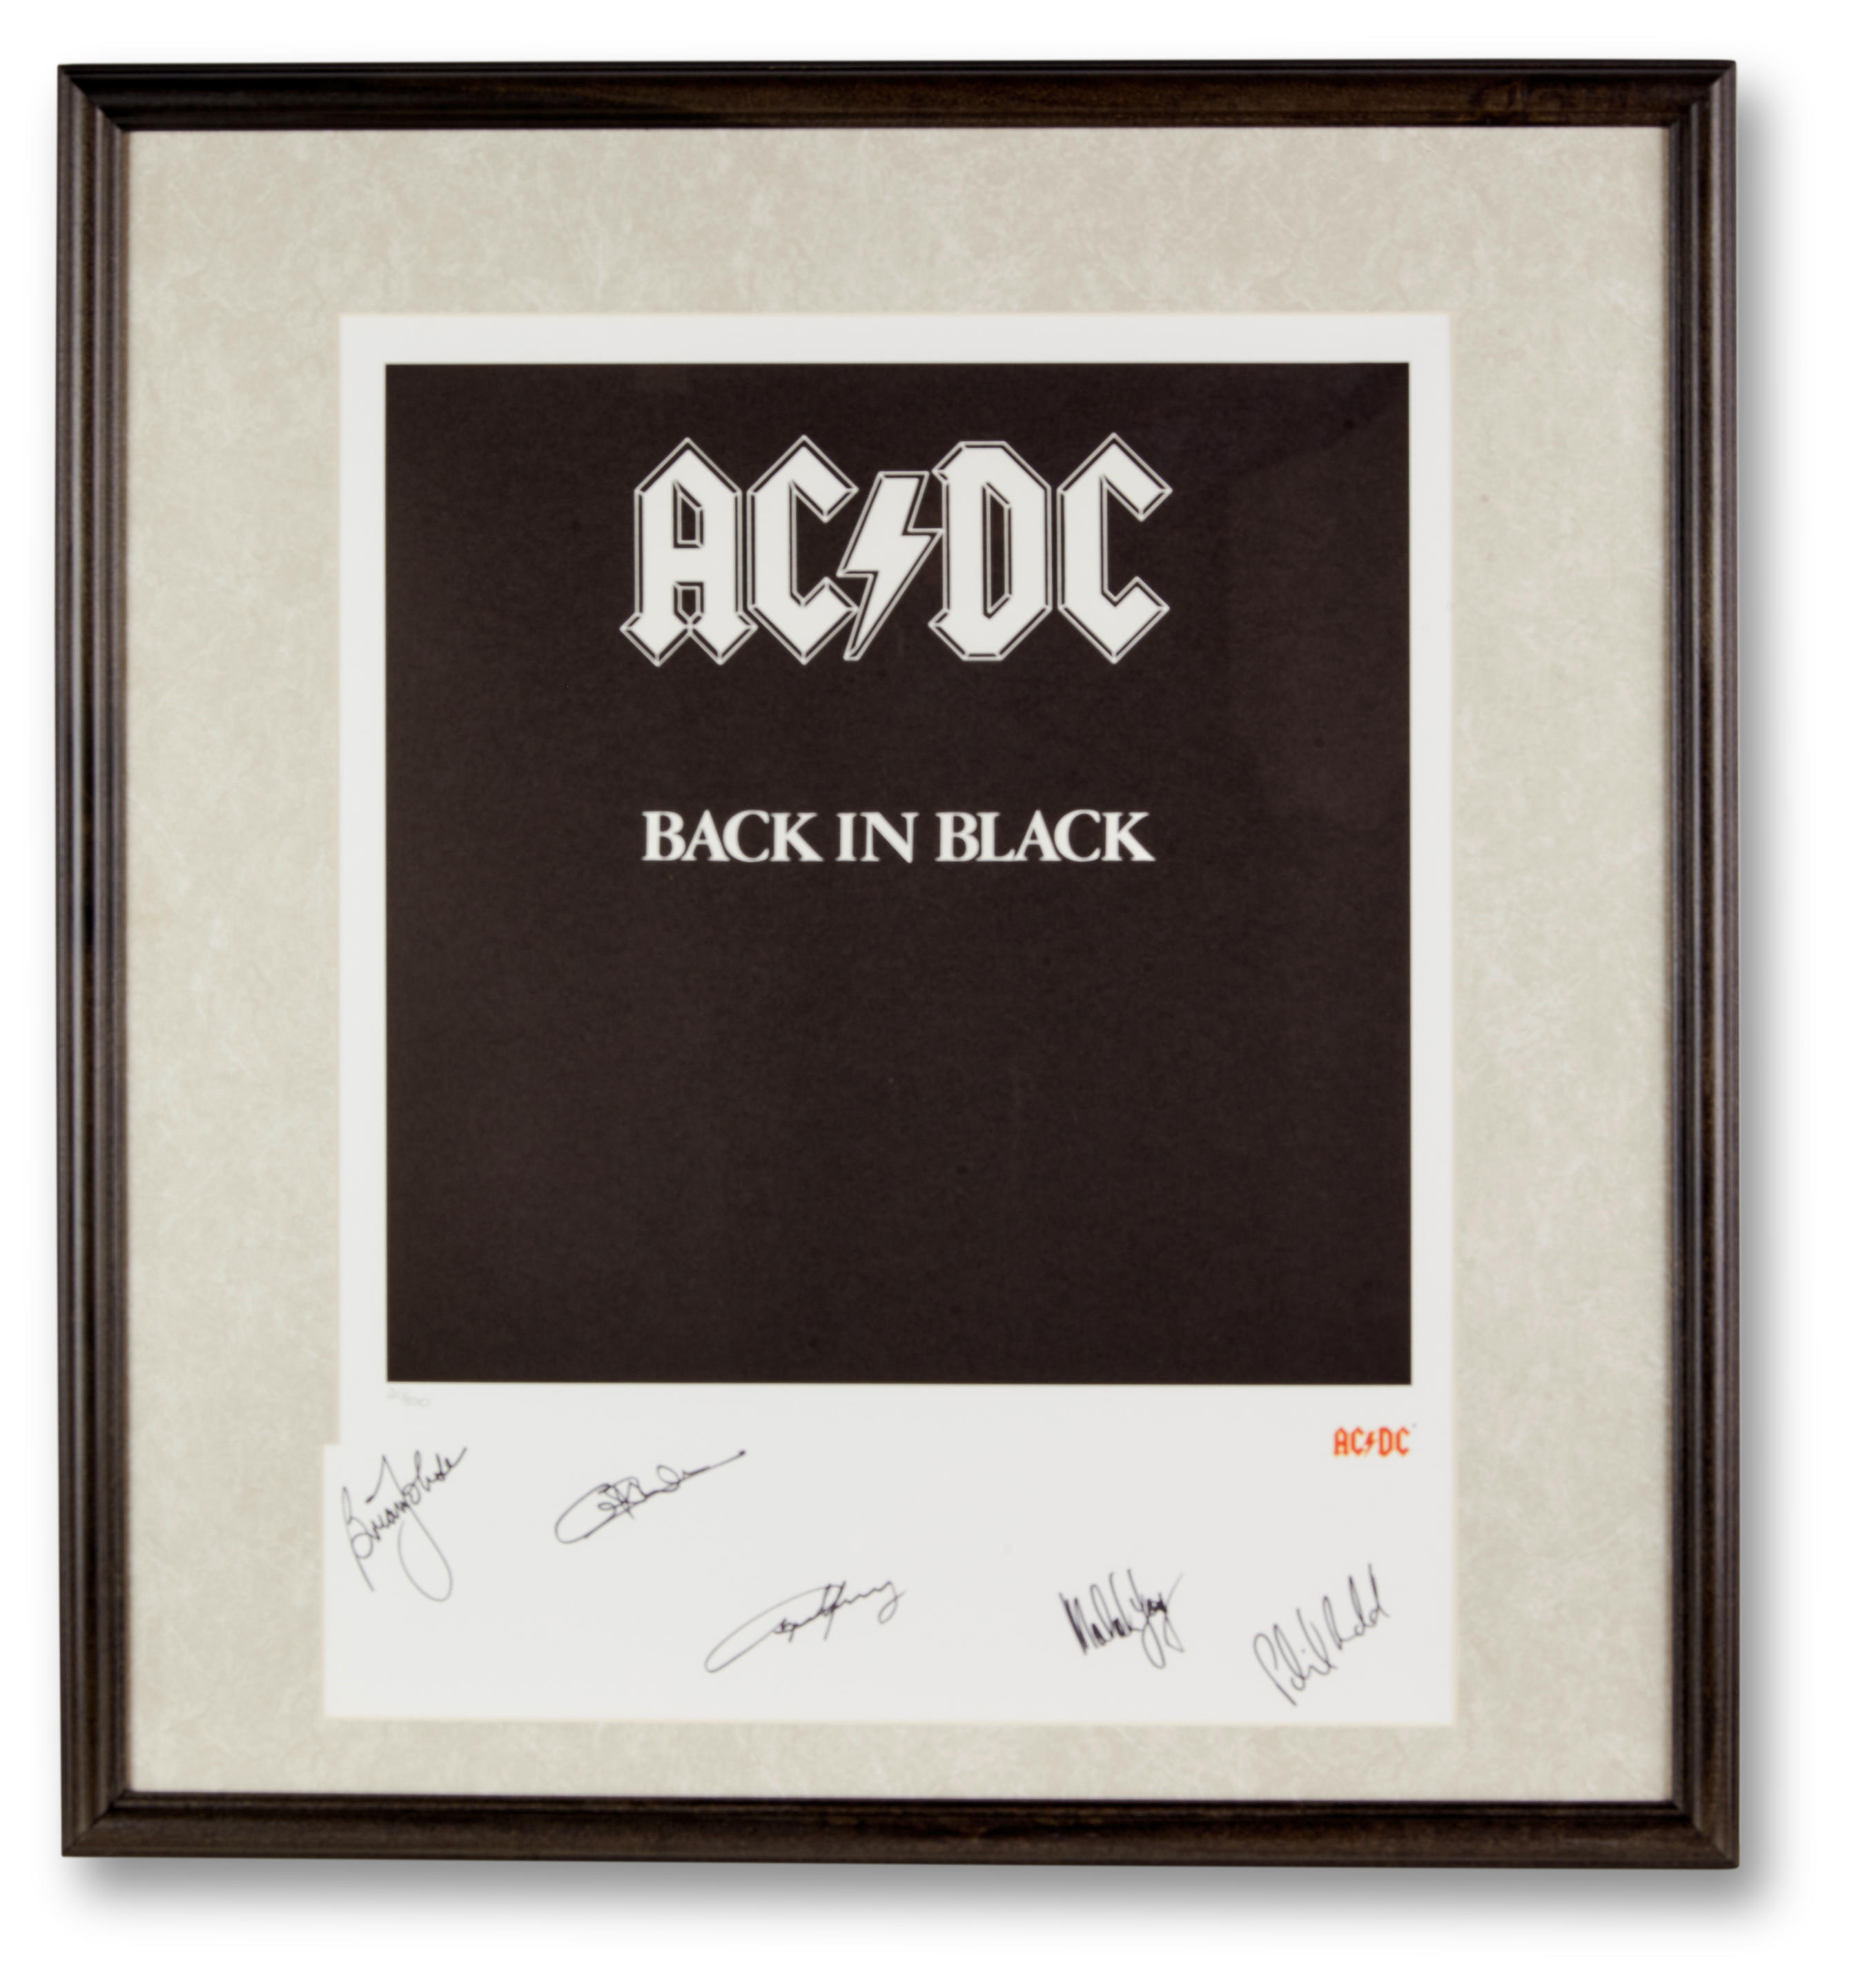 An AC/DC Signed Limited Edition Print Of The Album Cover Back In Black